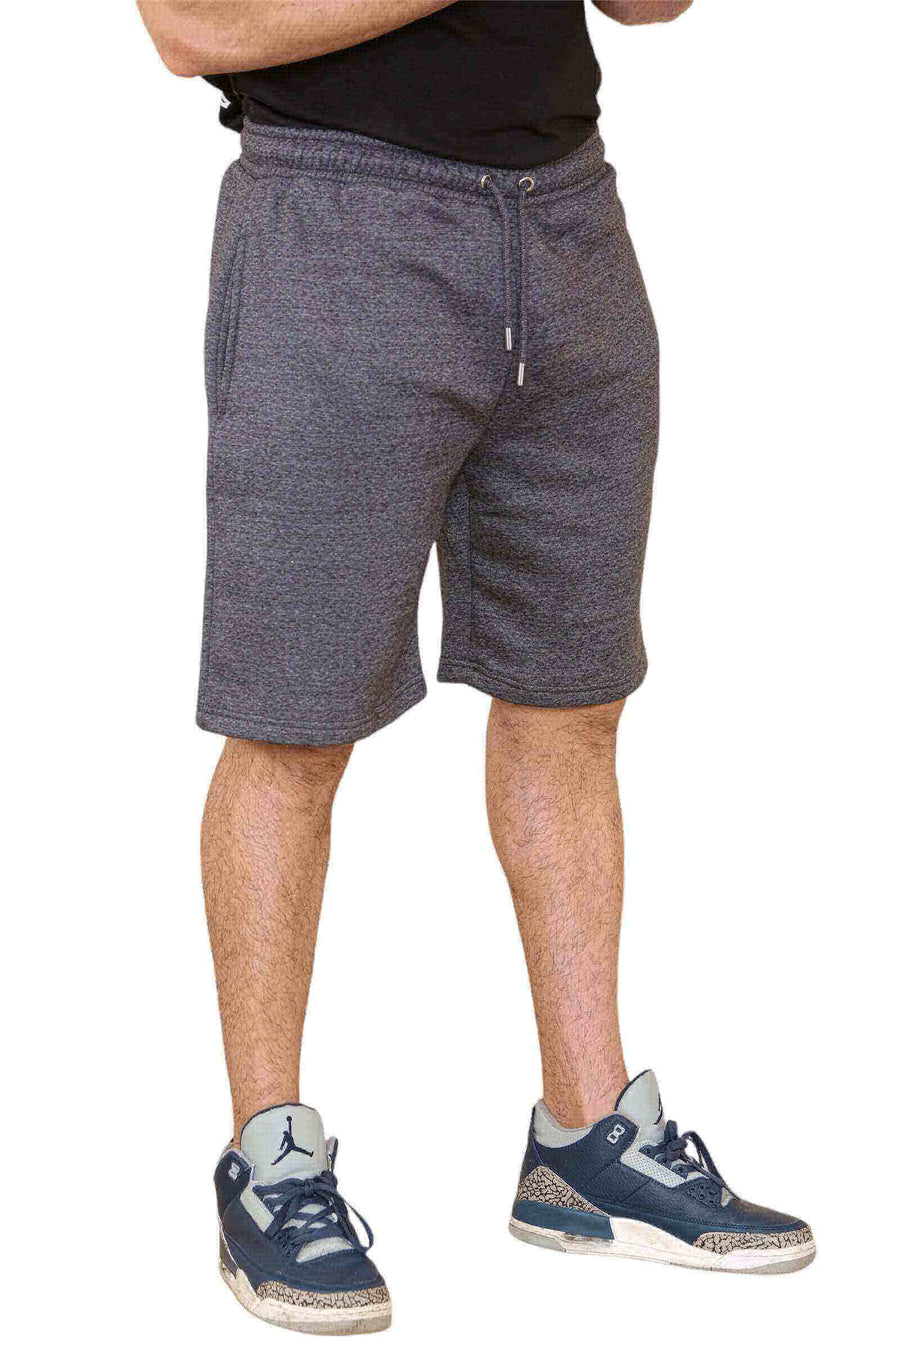 Left Side View of Men's Gym Shorts in Charcoal for Your Active Lifestyle